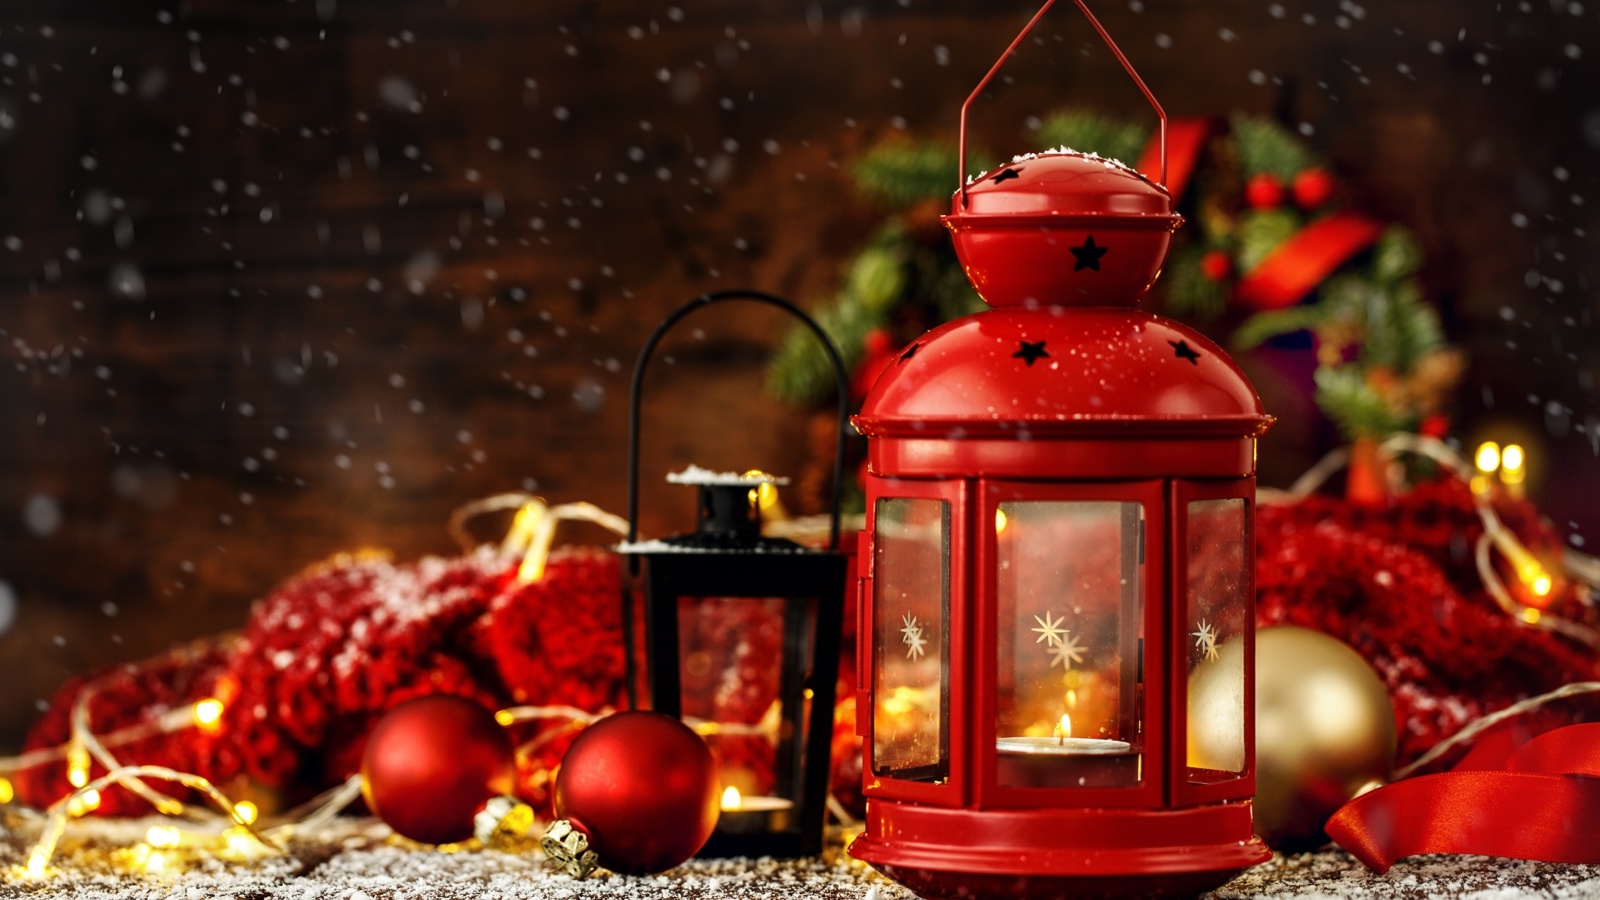 Christmas candles with holiday decor wallpaper 1600x900